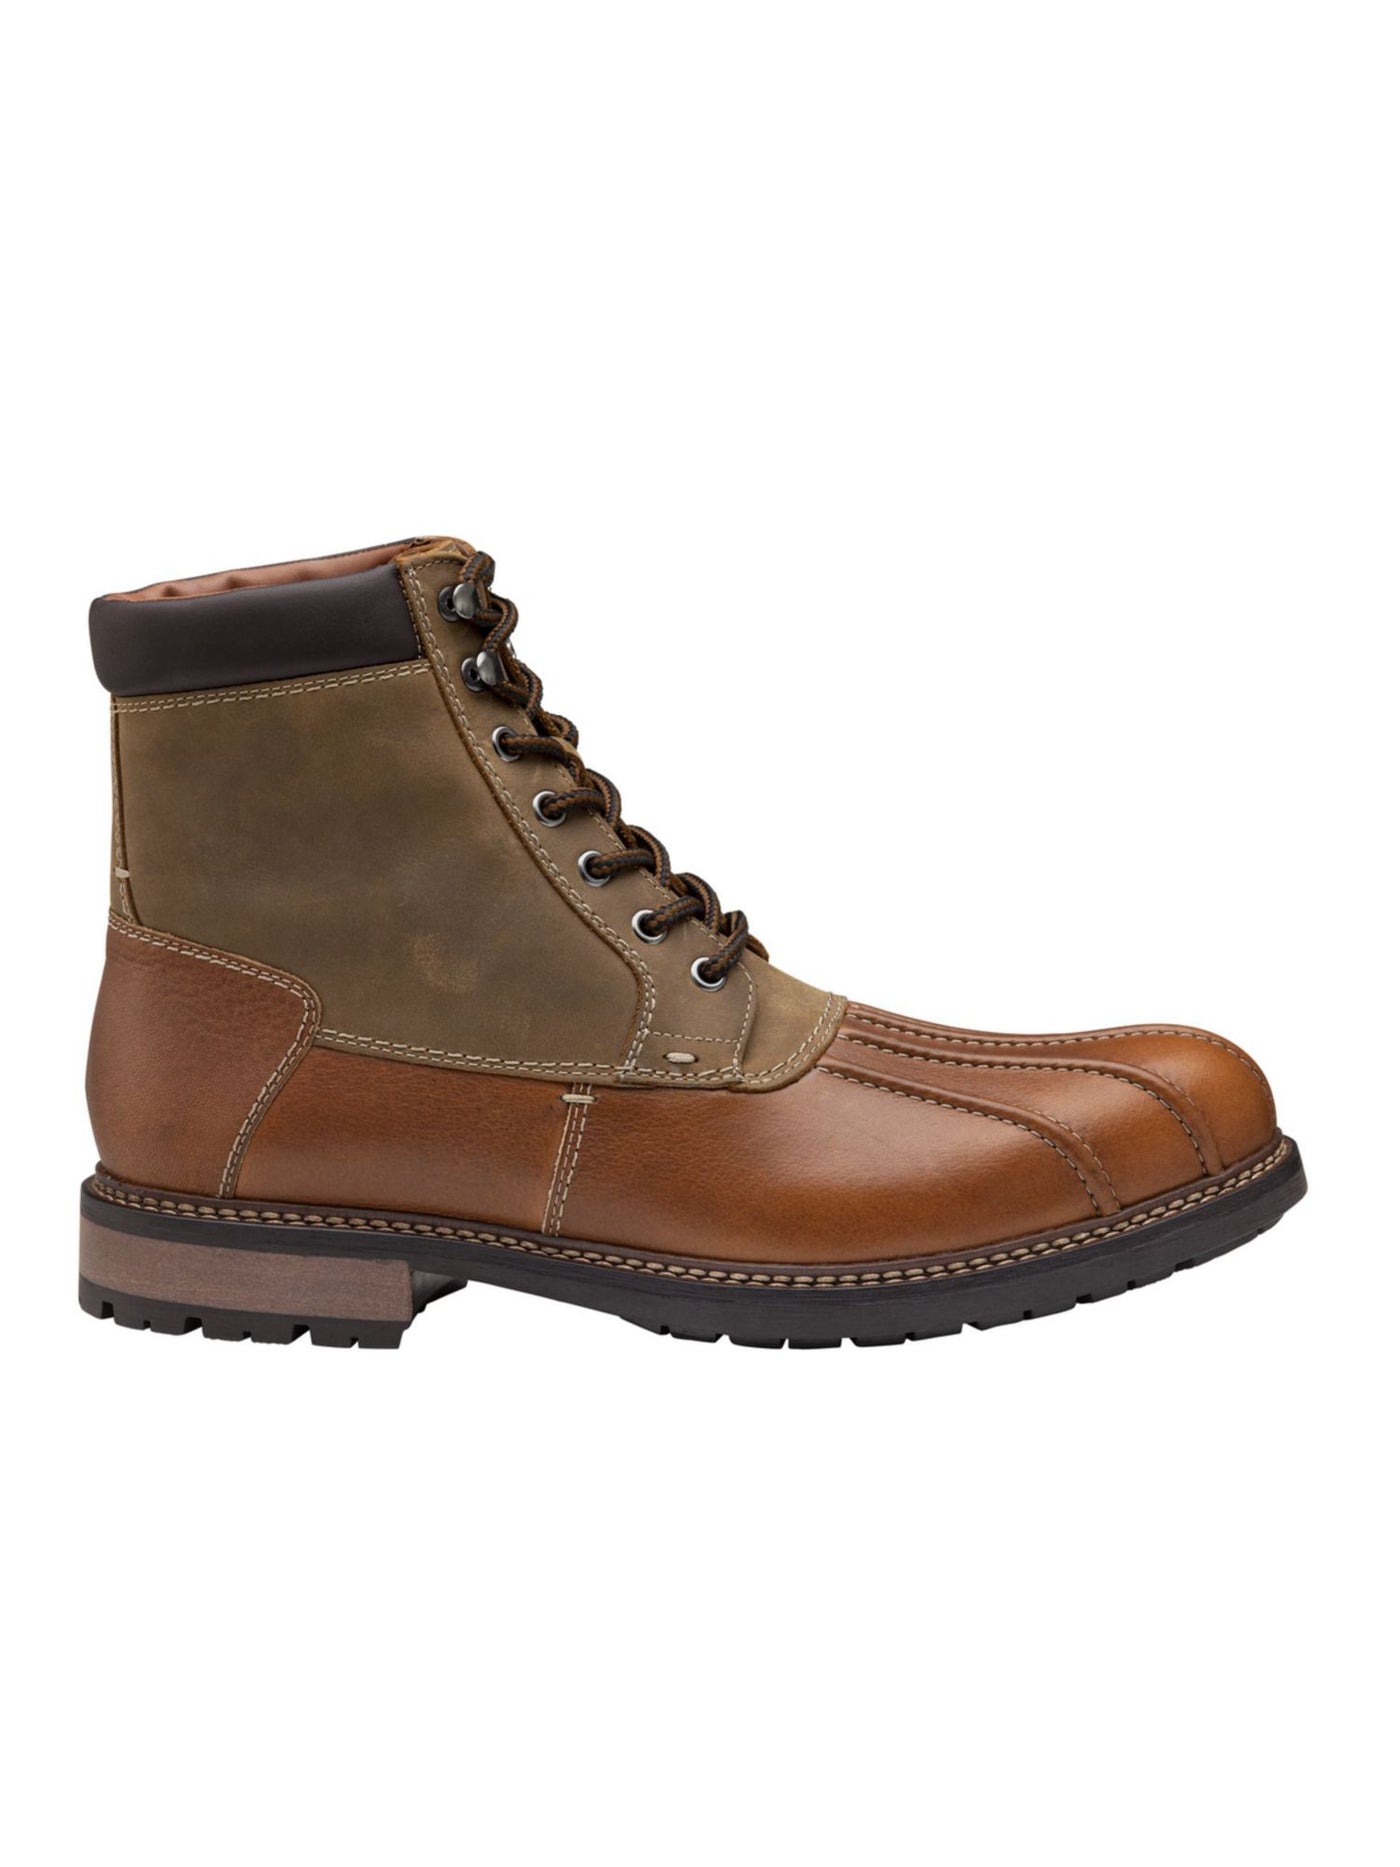 JOHNSTON & MURPHY Mens Brown Water Resistant Winstead Round Toe Lace-Up Leather Duck Boots 9 M